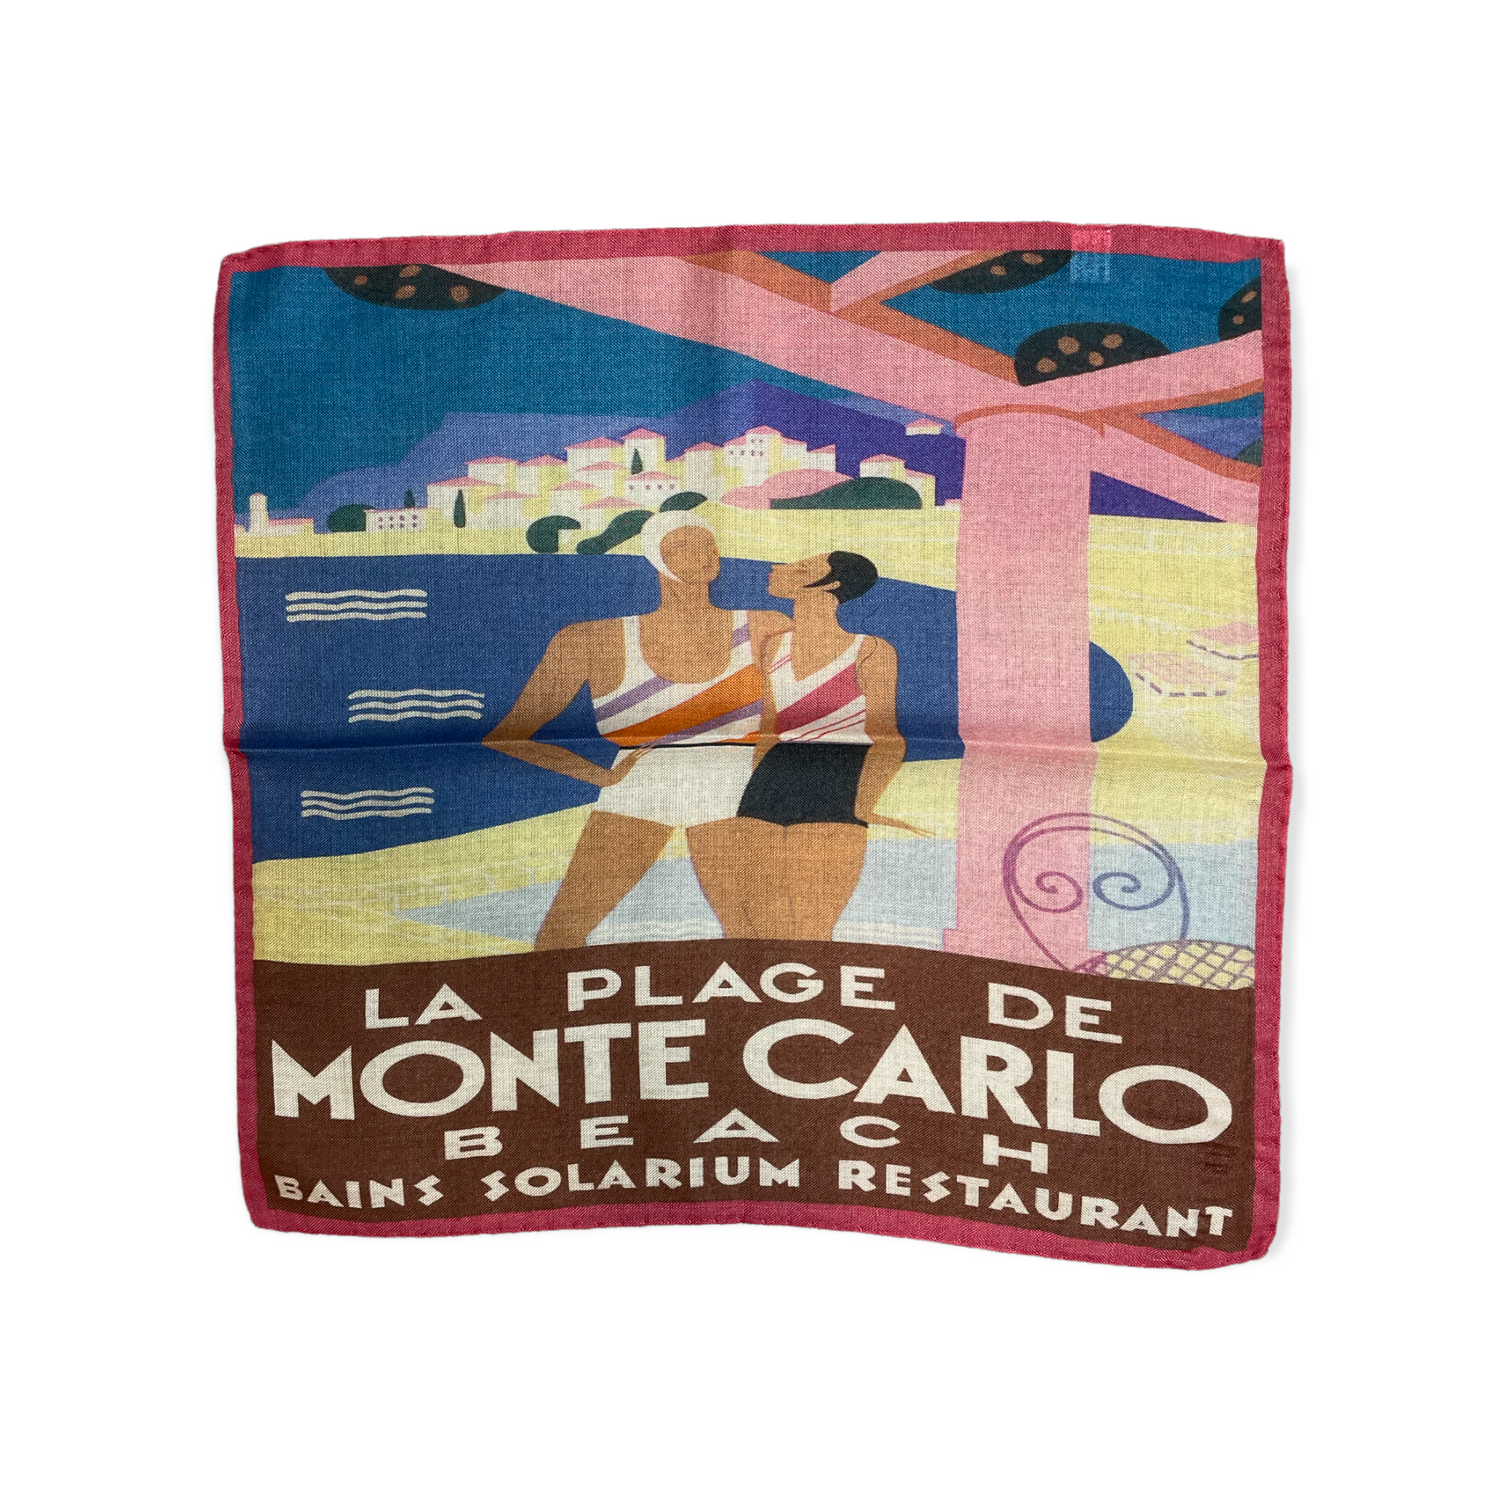 New designs in beautiful and colorful handkerchief for your new sport jacket or suit. Adding color and casualness to any outfit these pocket squares depict different exotic cities across the world. Here we have La Plage De Monte Carlo Beach in France. A depiction from the original 1929 Michael Bouchaud Art Deco style poster in cubism form. Picturing the nostalgia of white sand beaches of the rich and famous. Hand rolled edge. Made in Italy. 14 x14 inches.